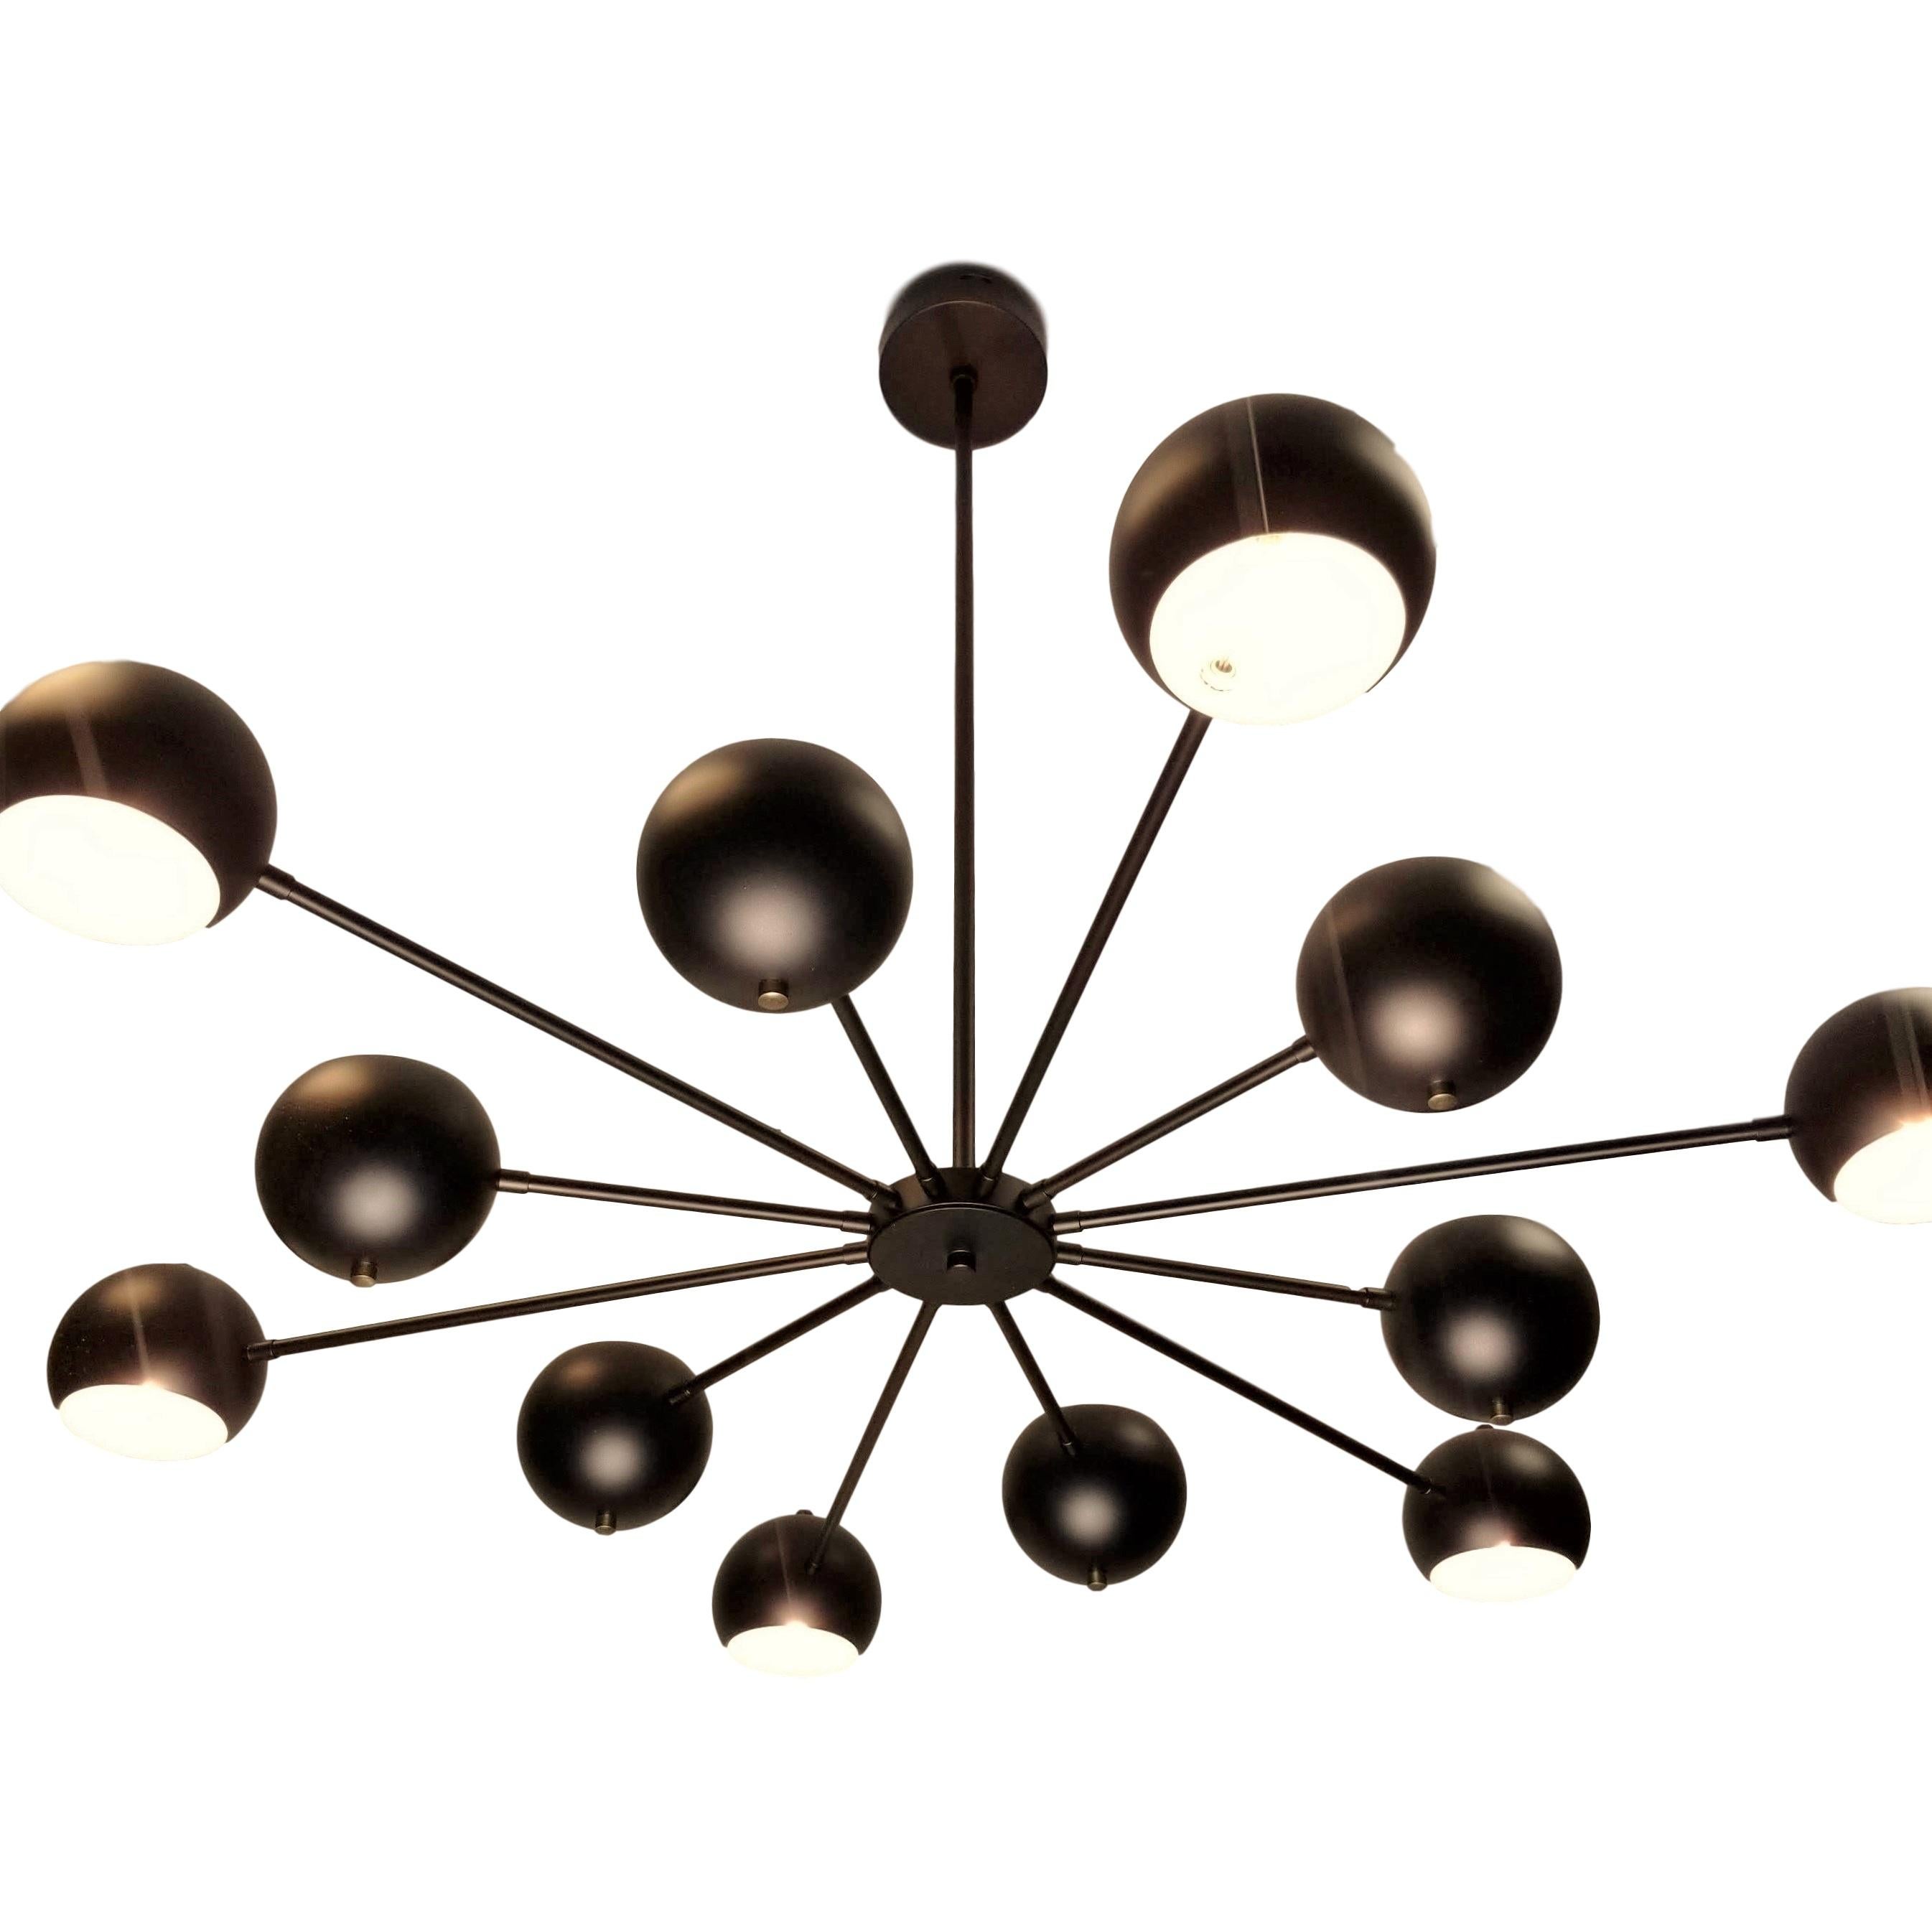 Introducing the Supernova chandelier-- a dynamic, lively design by Blueprint Lighting, 2019. Supernova is constructed with a brass frame with spun aluminium orbs; shown in our hand finished oil-rubbed bronze with natural brass button finials. This